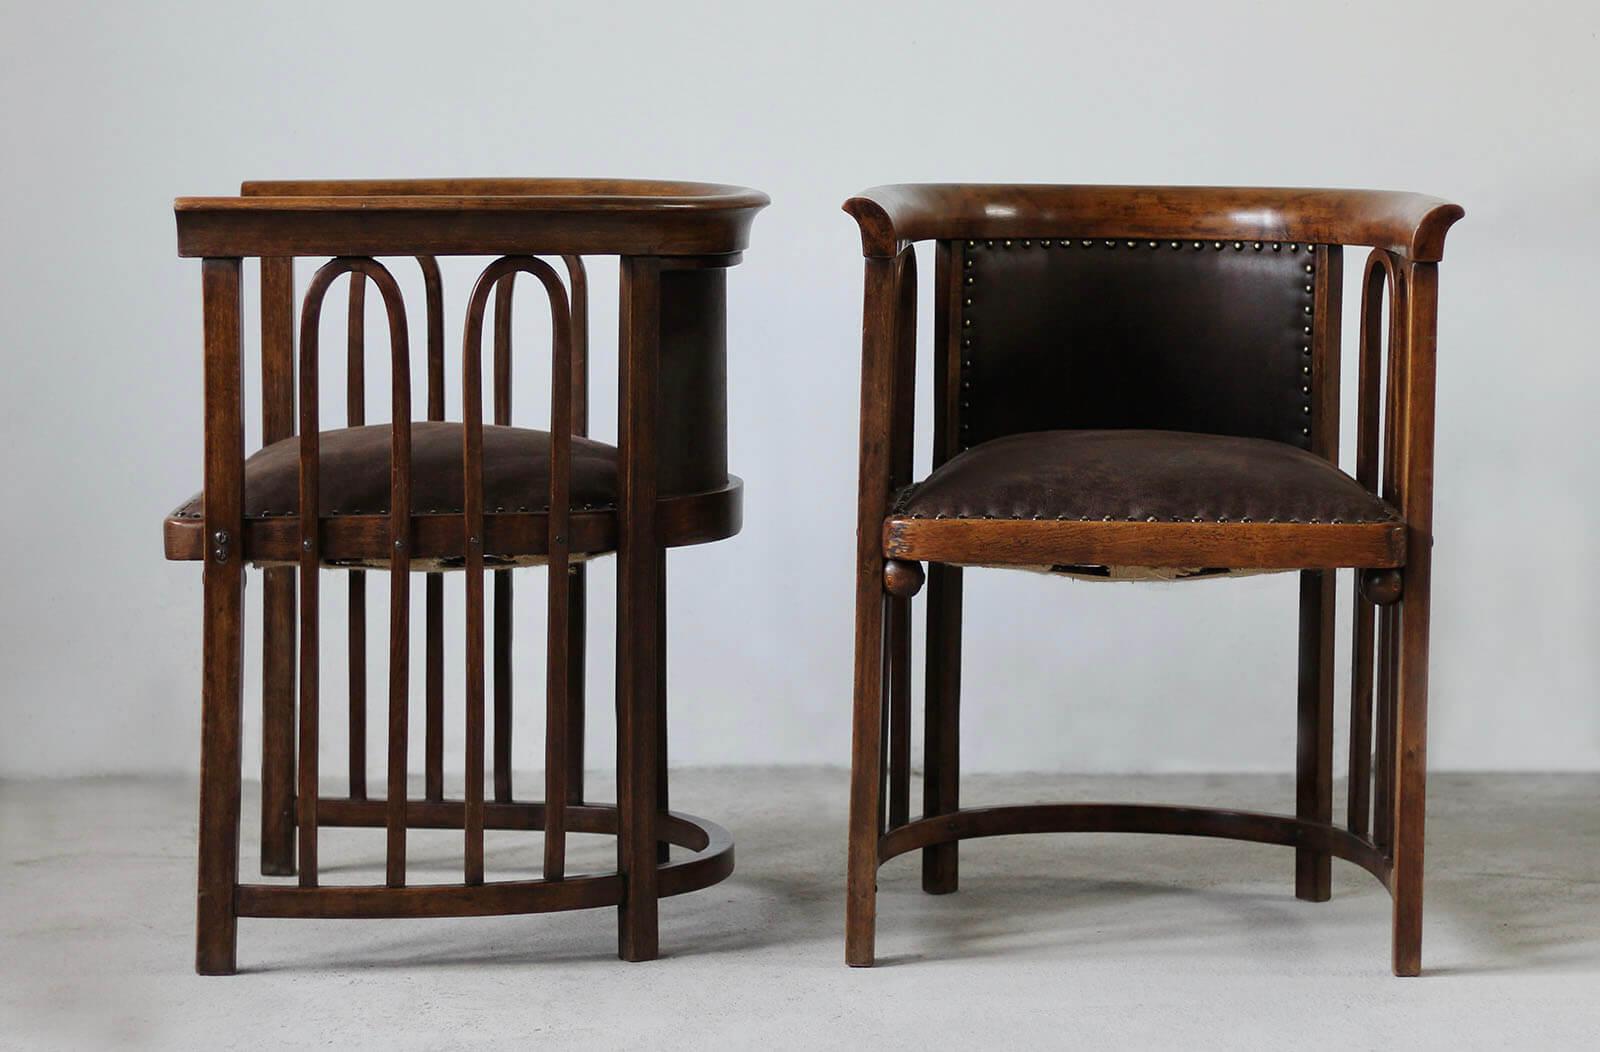 Czech Set of 2 Armchairs designed by J. Hoffman, Model No. 423, Early 20th Century For Sale